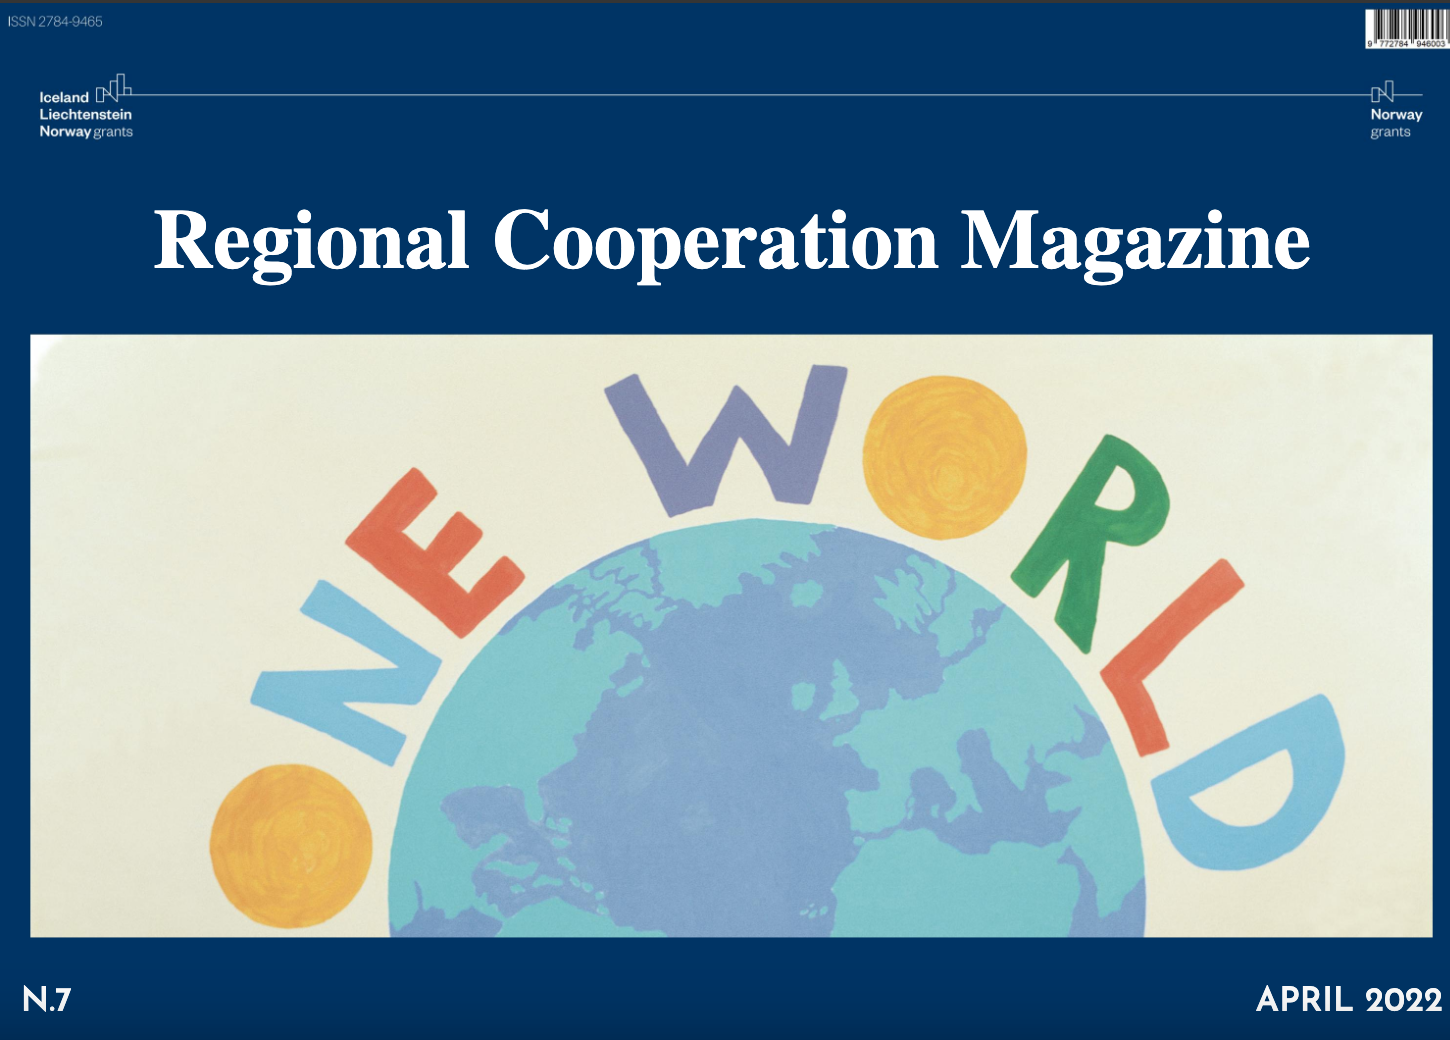 The 7th issue of the Regional Cooperation Online Magazine is now out!